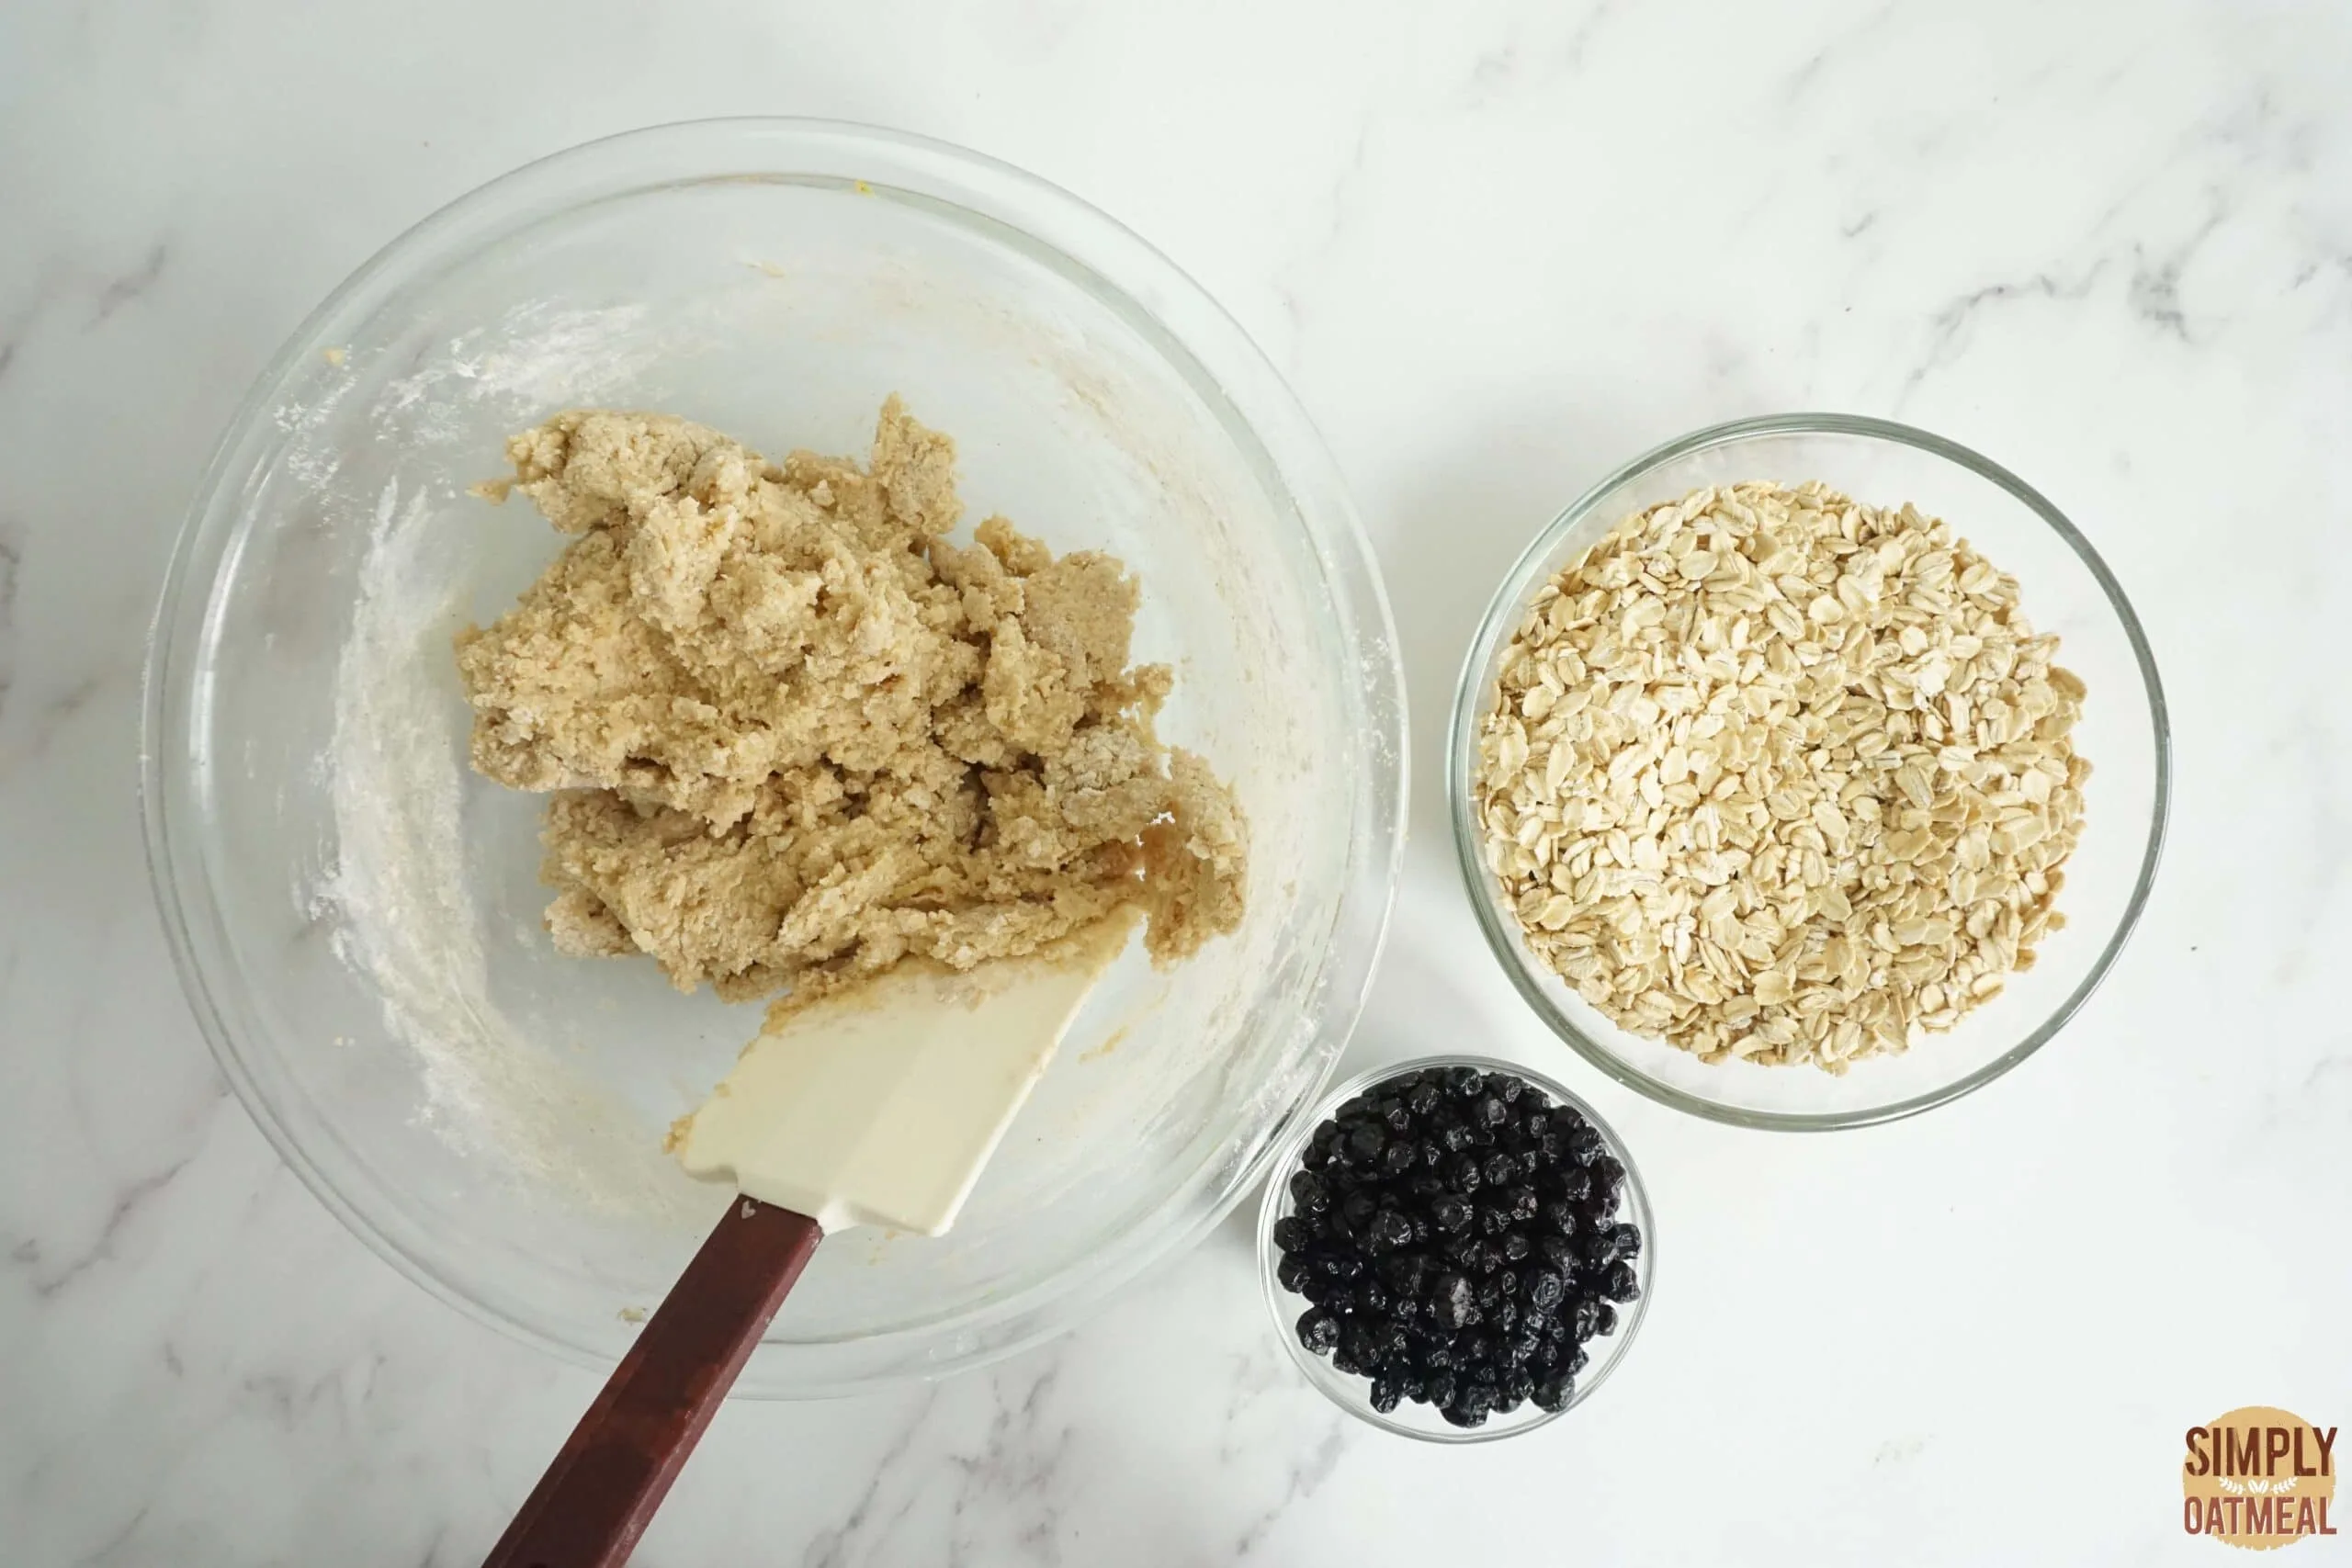 Fold oats and dried blueberries into the raw cookie dough.